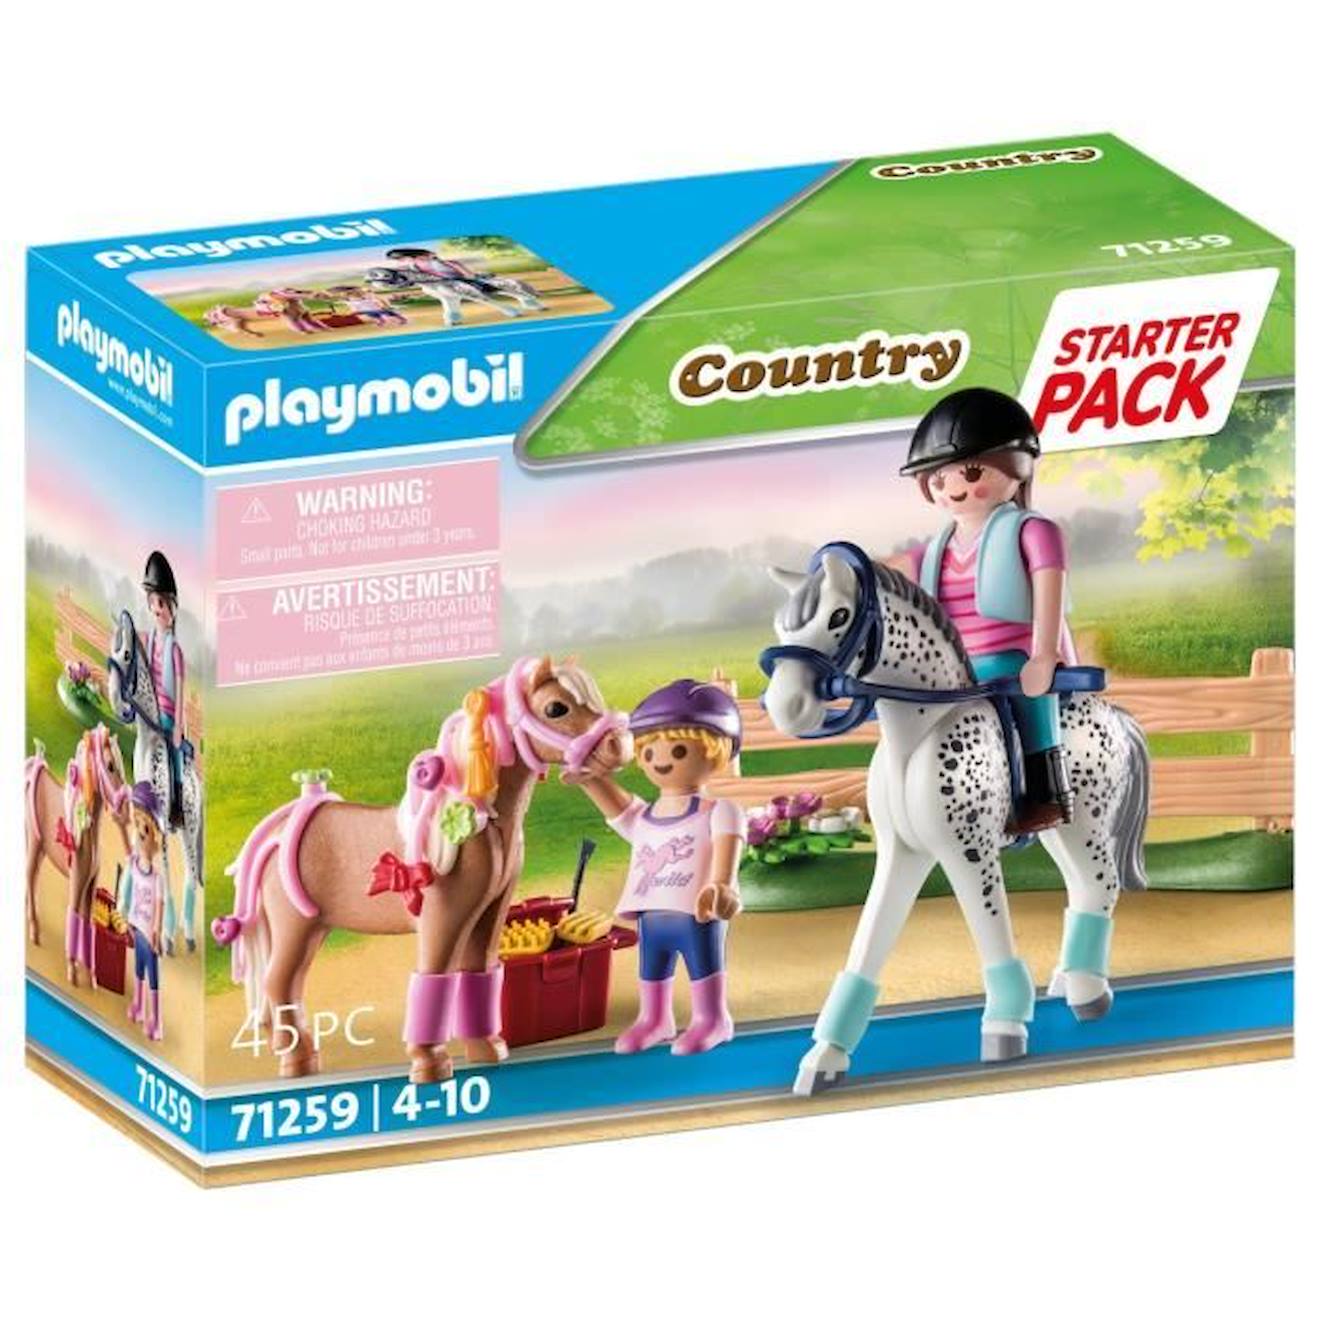 Playmobil - 71259 - Country - Starter Pack - Cavaliers Et Chevaux Bleu